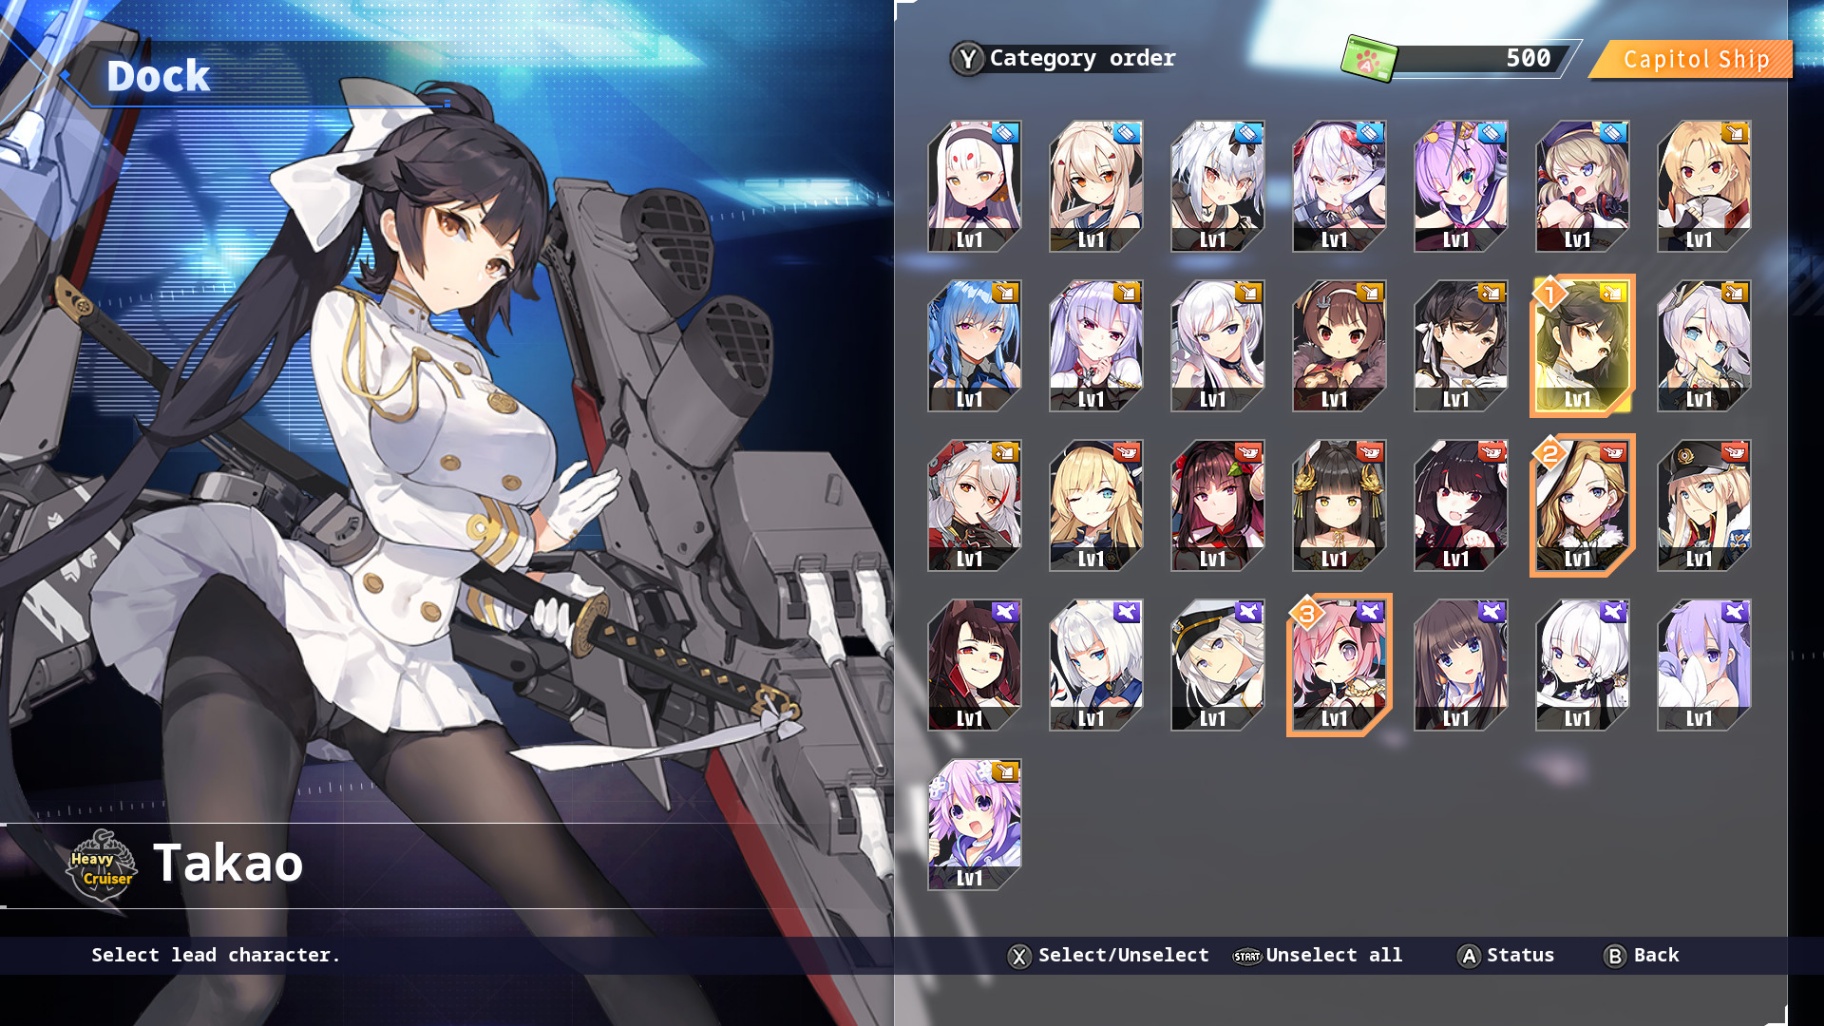 Azur Lane - Discover How to Unlock Characters